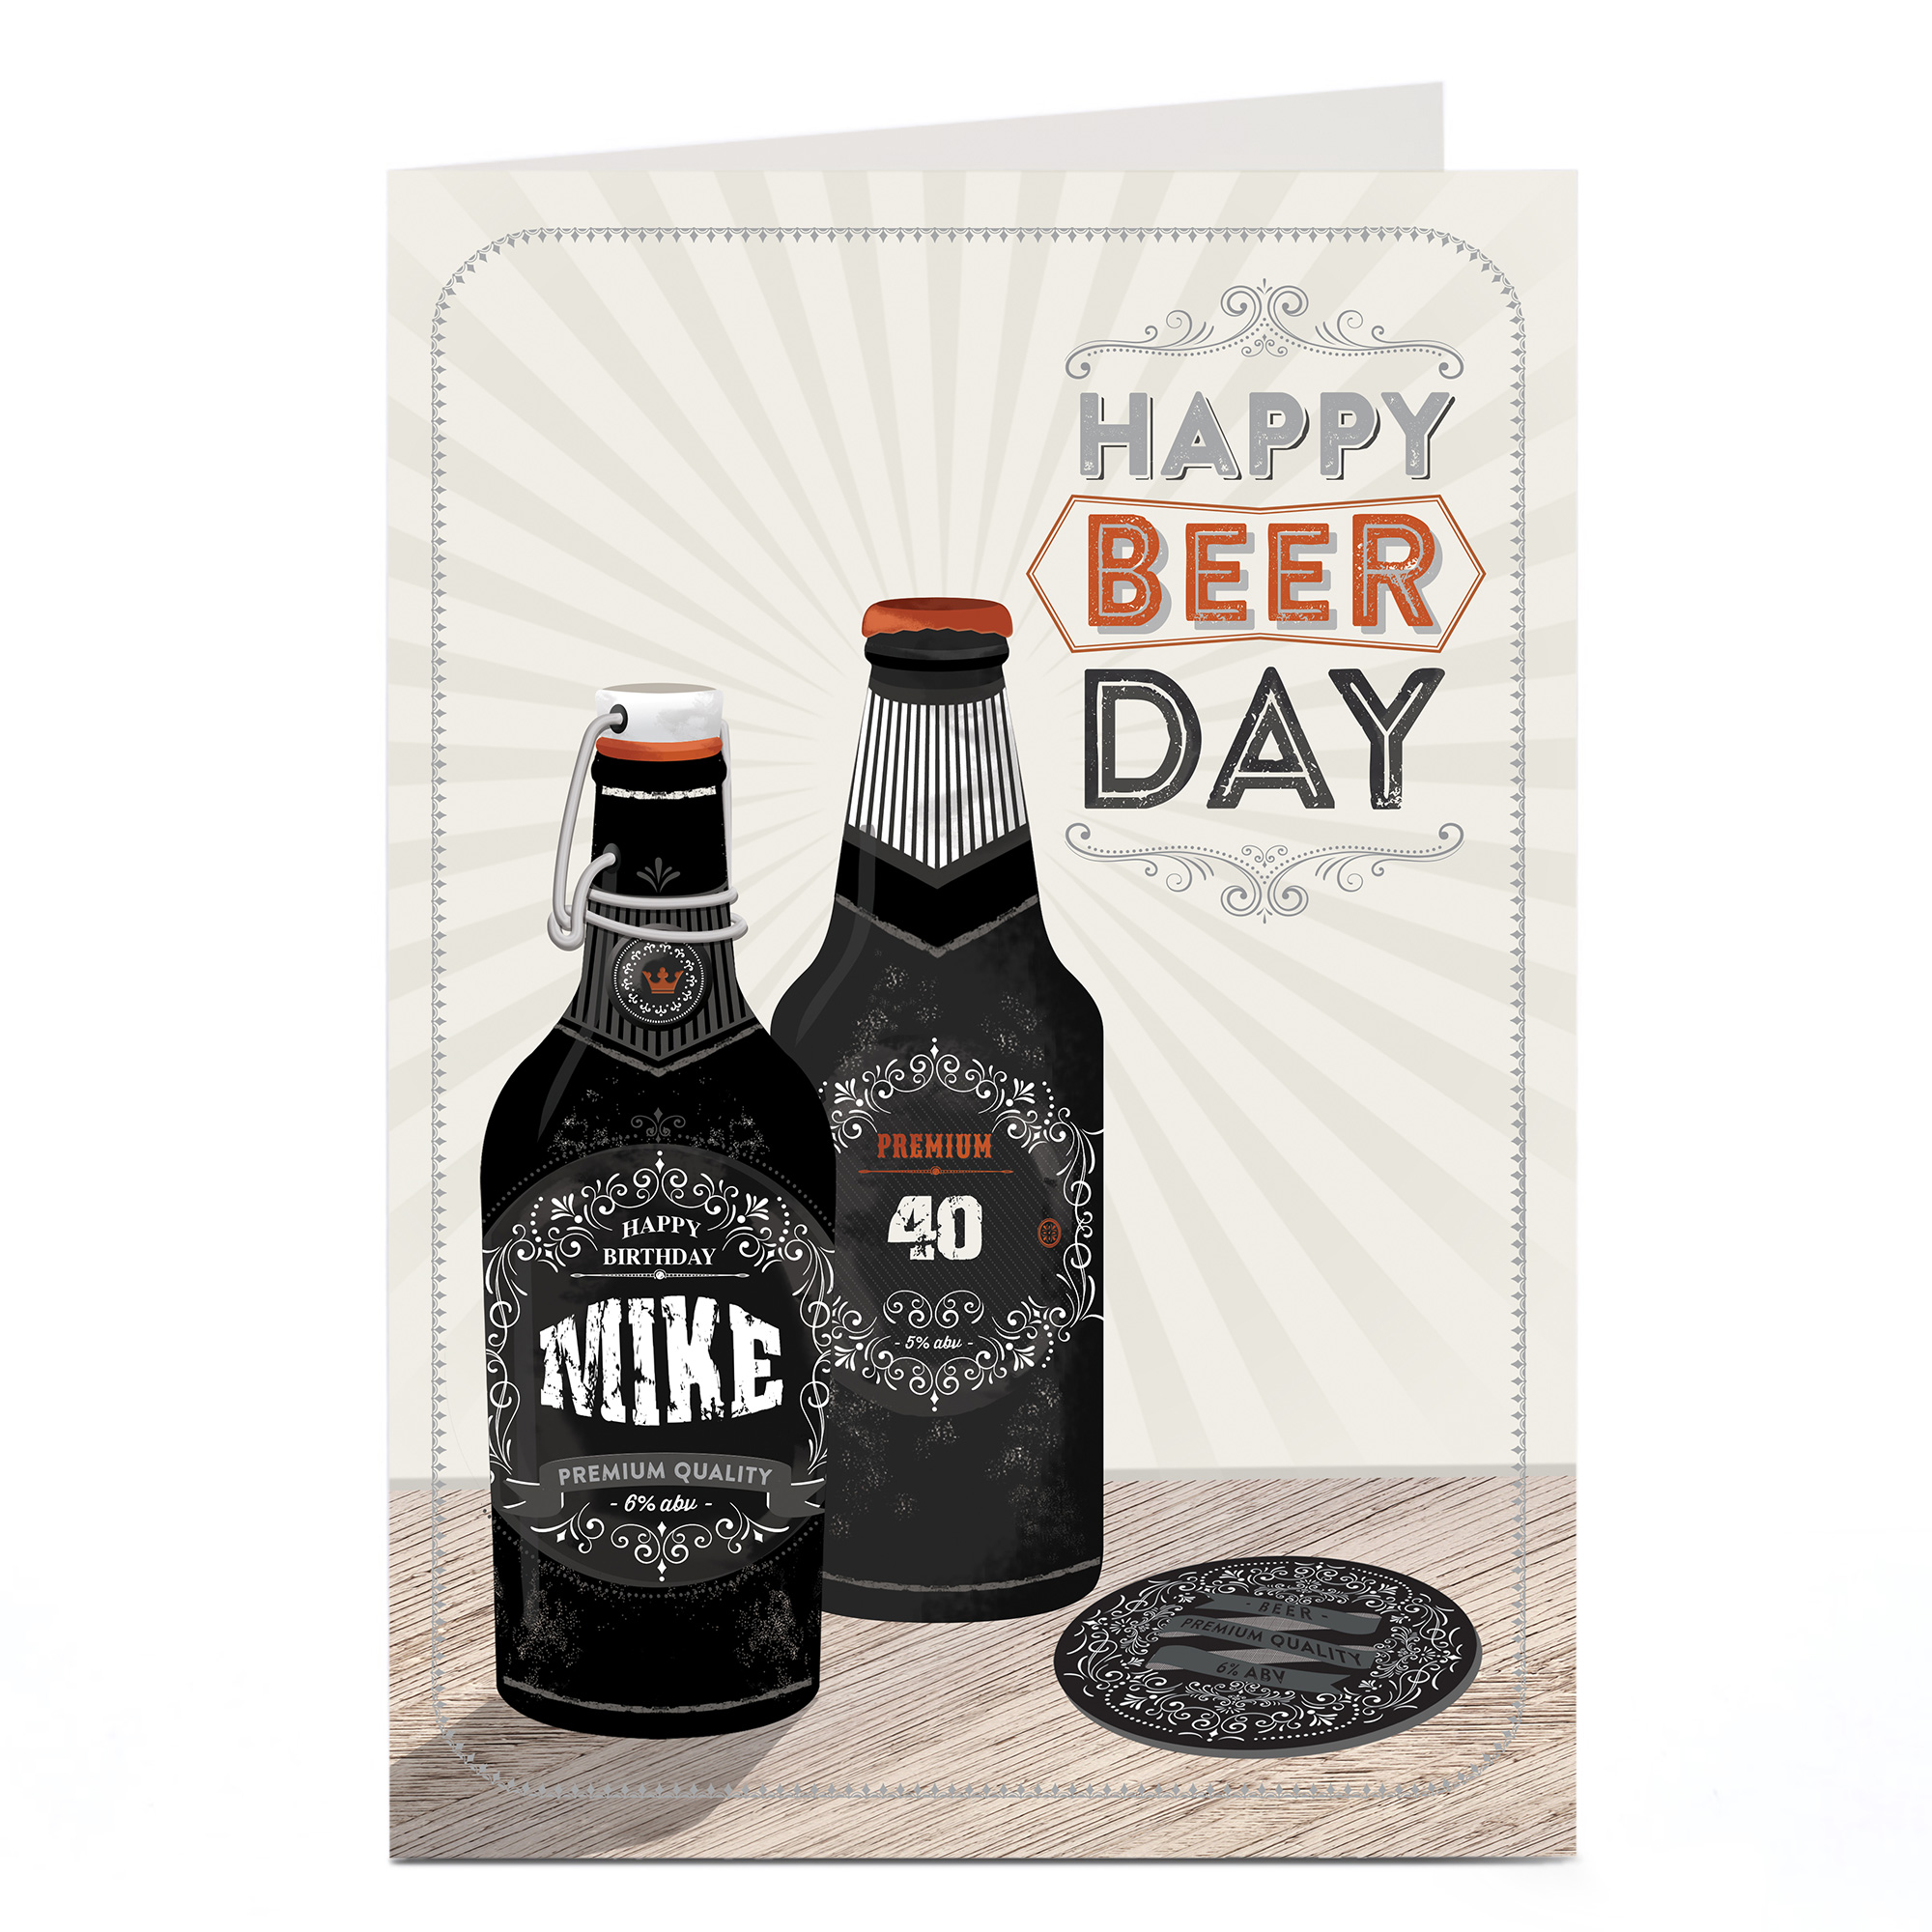 Buy Personalised Birthday Card - Happy Beer Day for GBP 1.79-4.99 ...